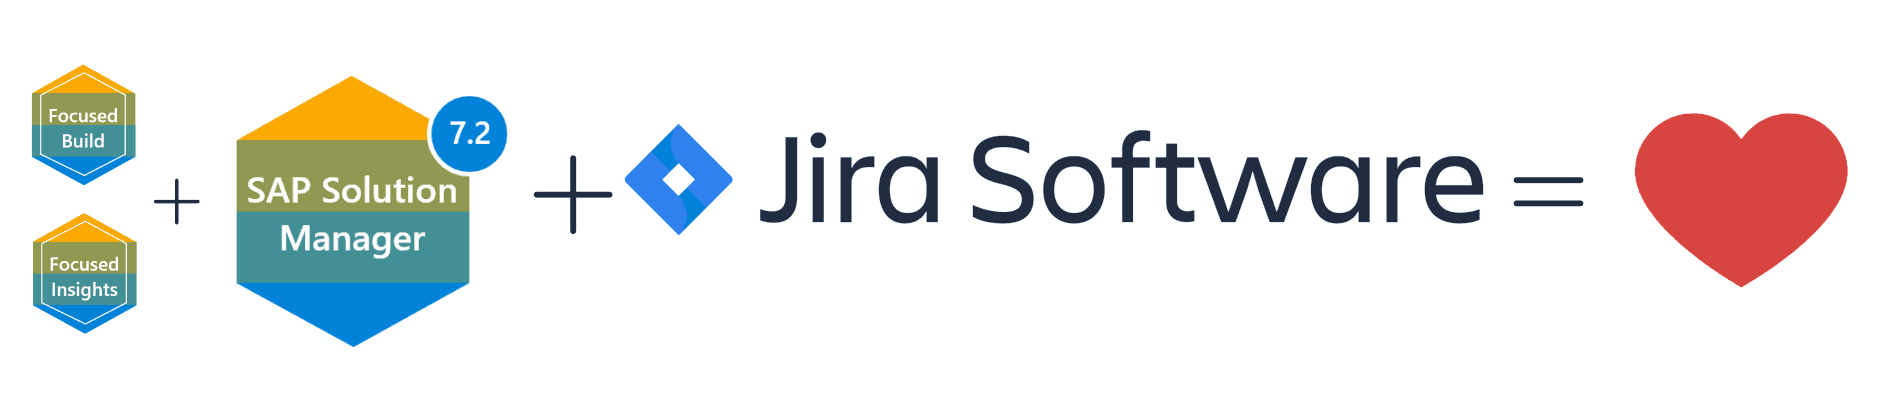 Jira Connector For SAP Solution Manager Focused Build